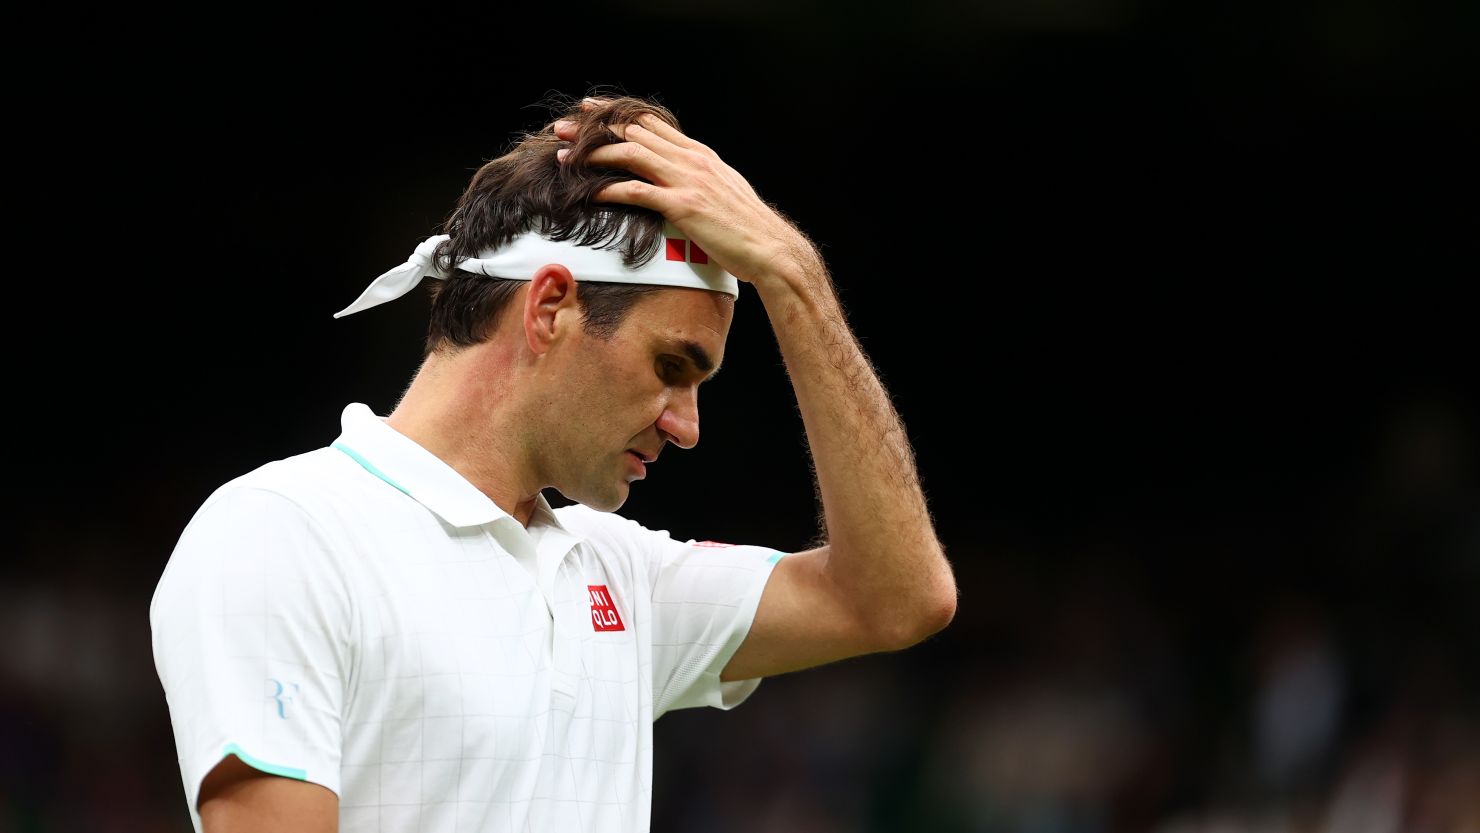 The last time Roger Federer lost in a first-round grand slam match was at Wimbledon in 2002. 